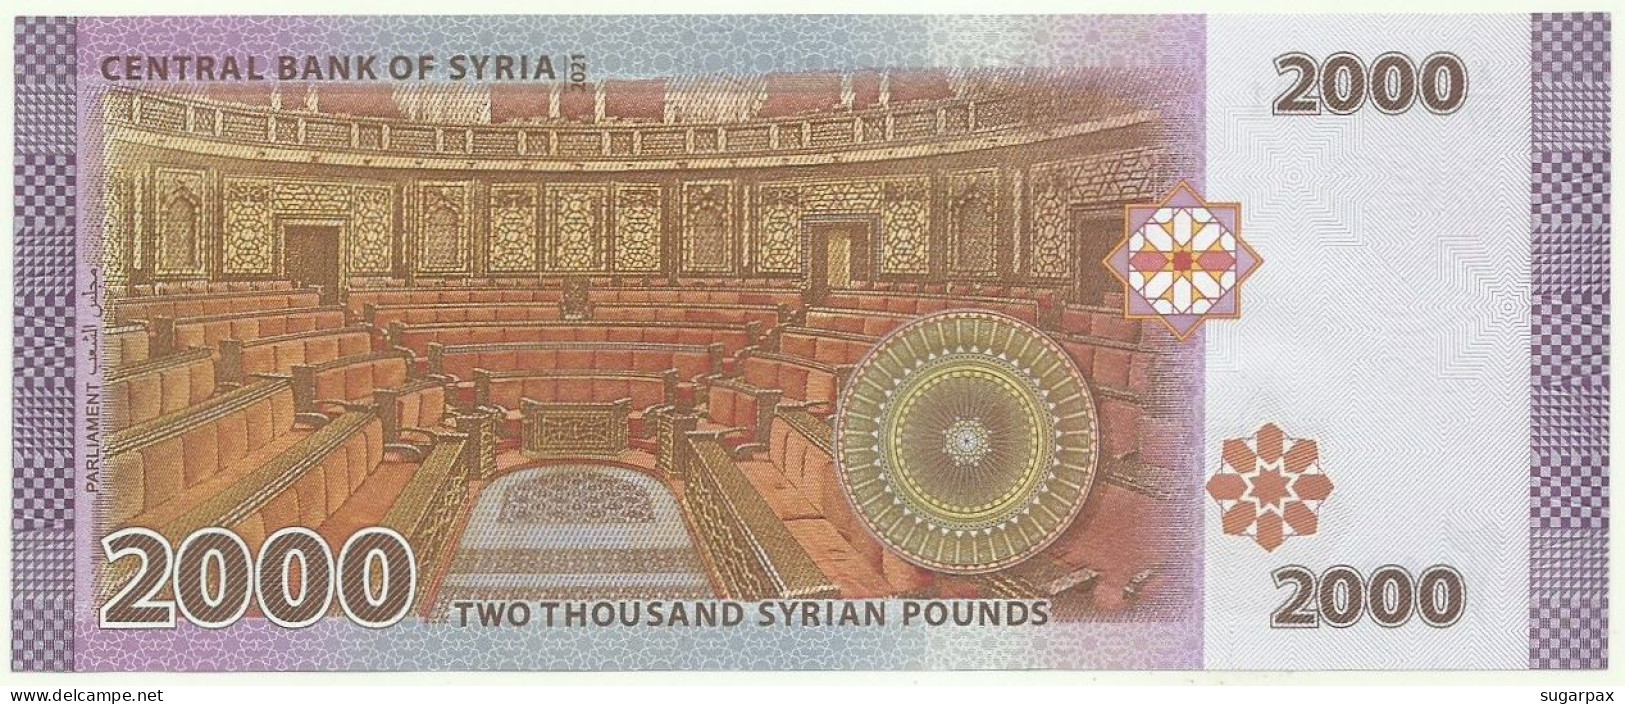 Syria - 3 X 2000 Syrian Pounds - 2021 / AH 1442 - Pick 117.NEW - Unc. - Serie A/57 - 2.000 - Syrien